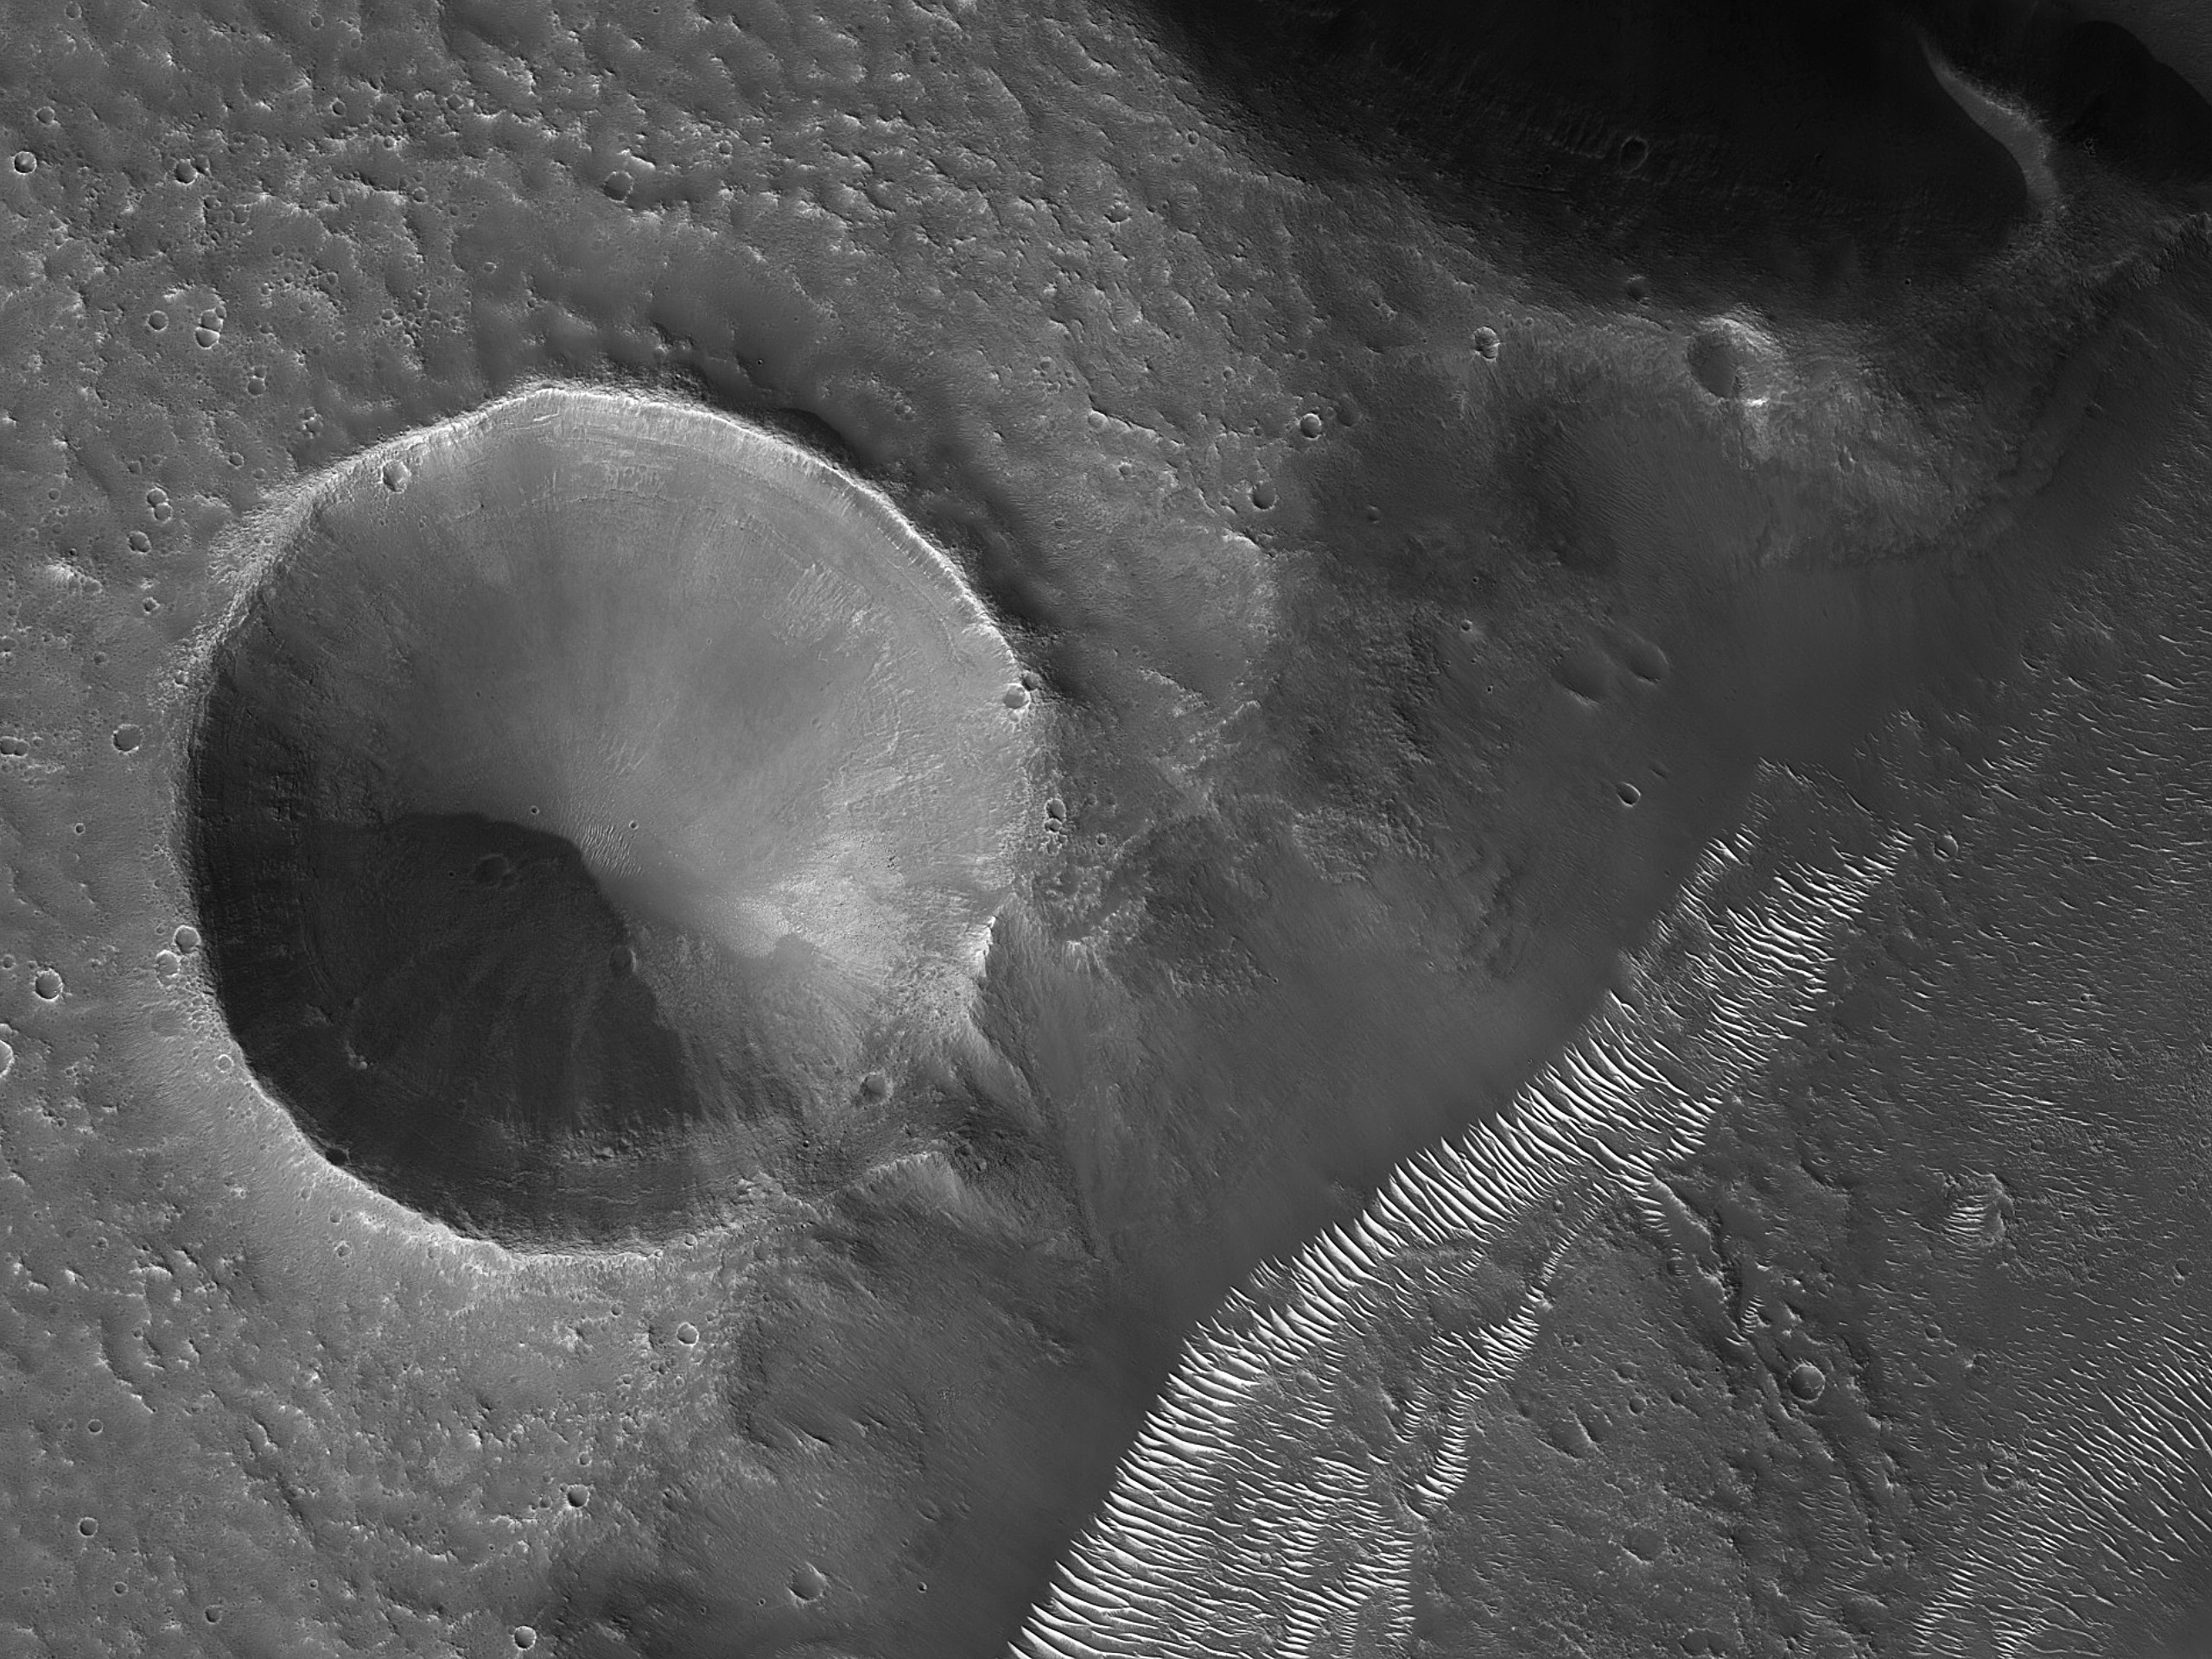 Layers in a Crater 